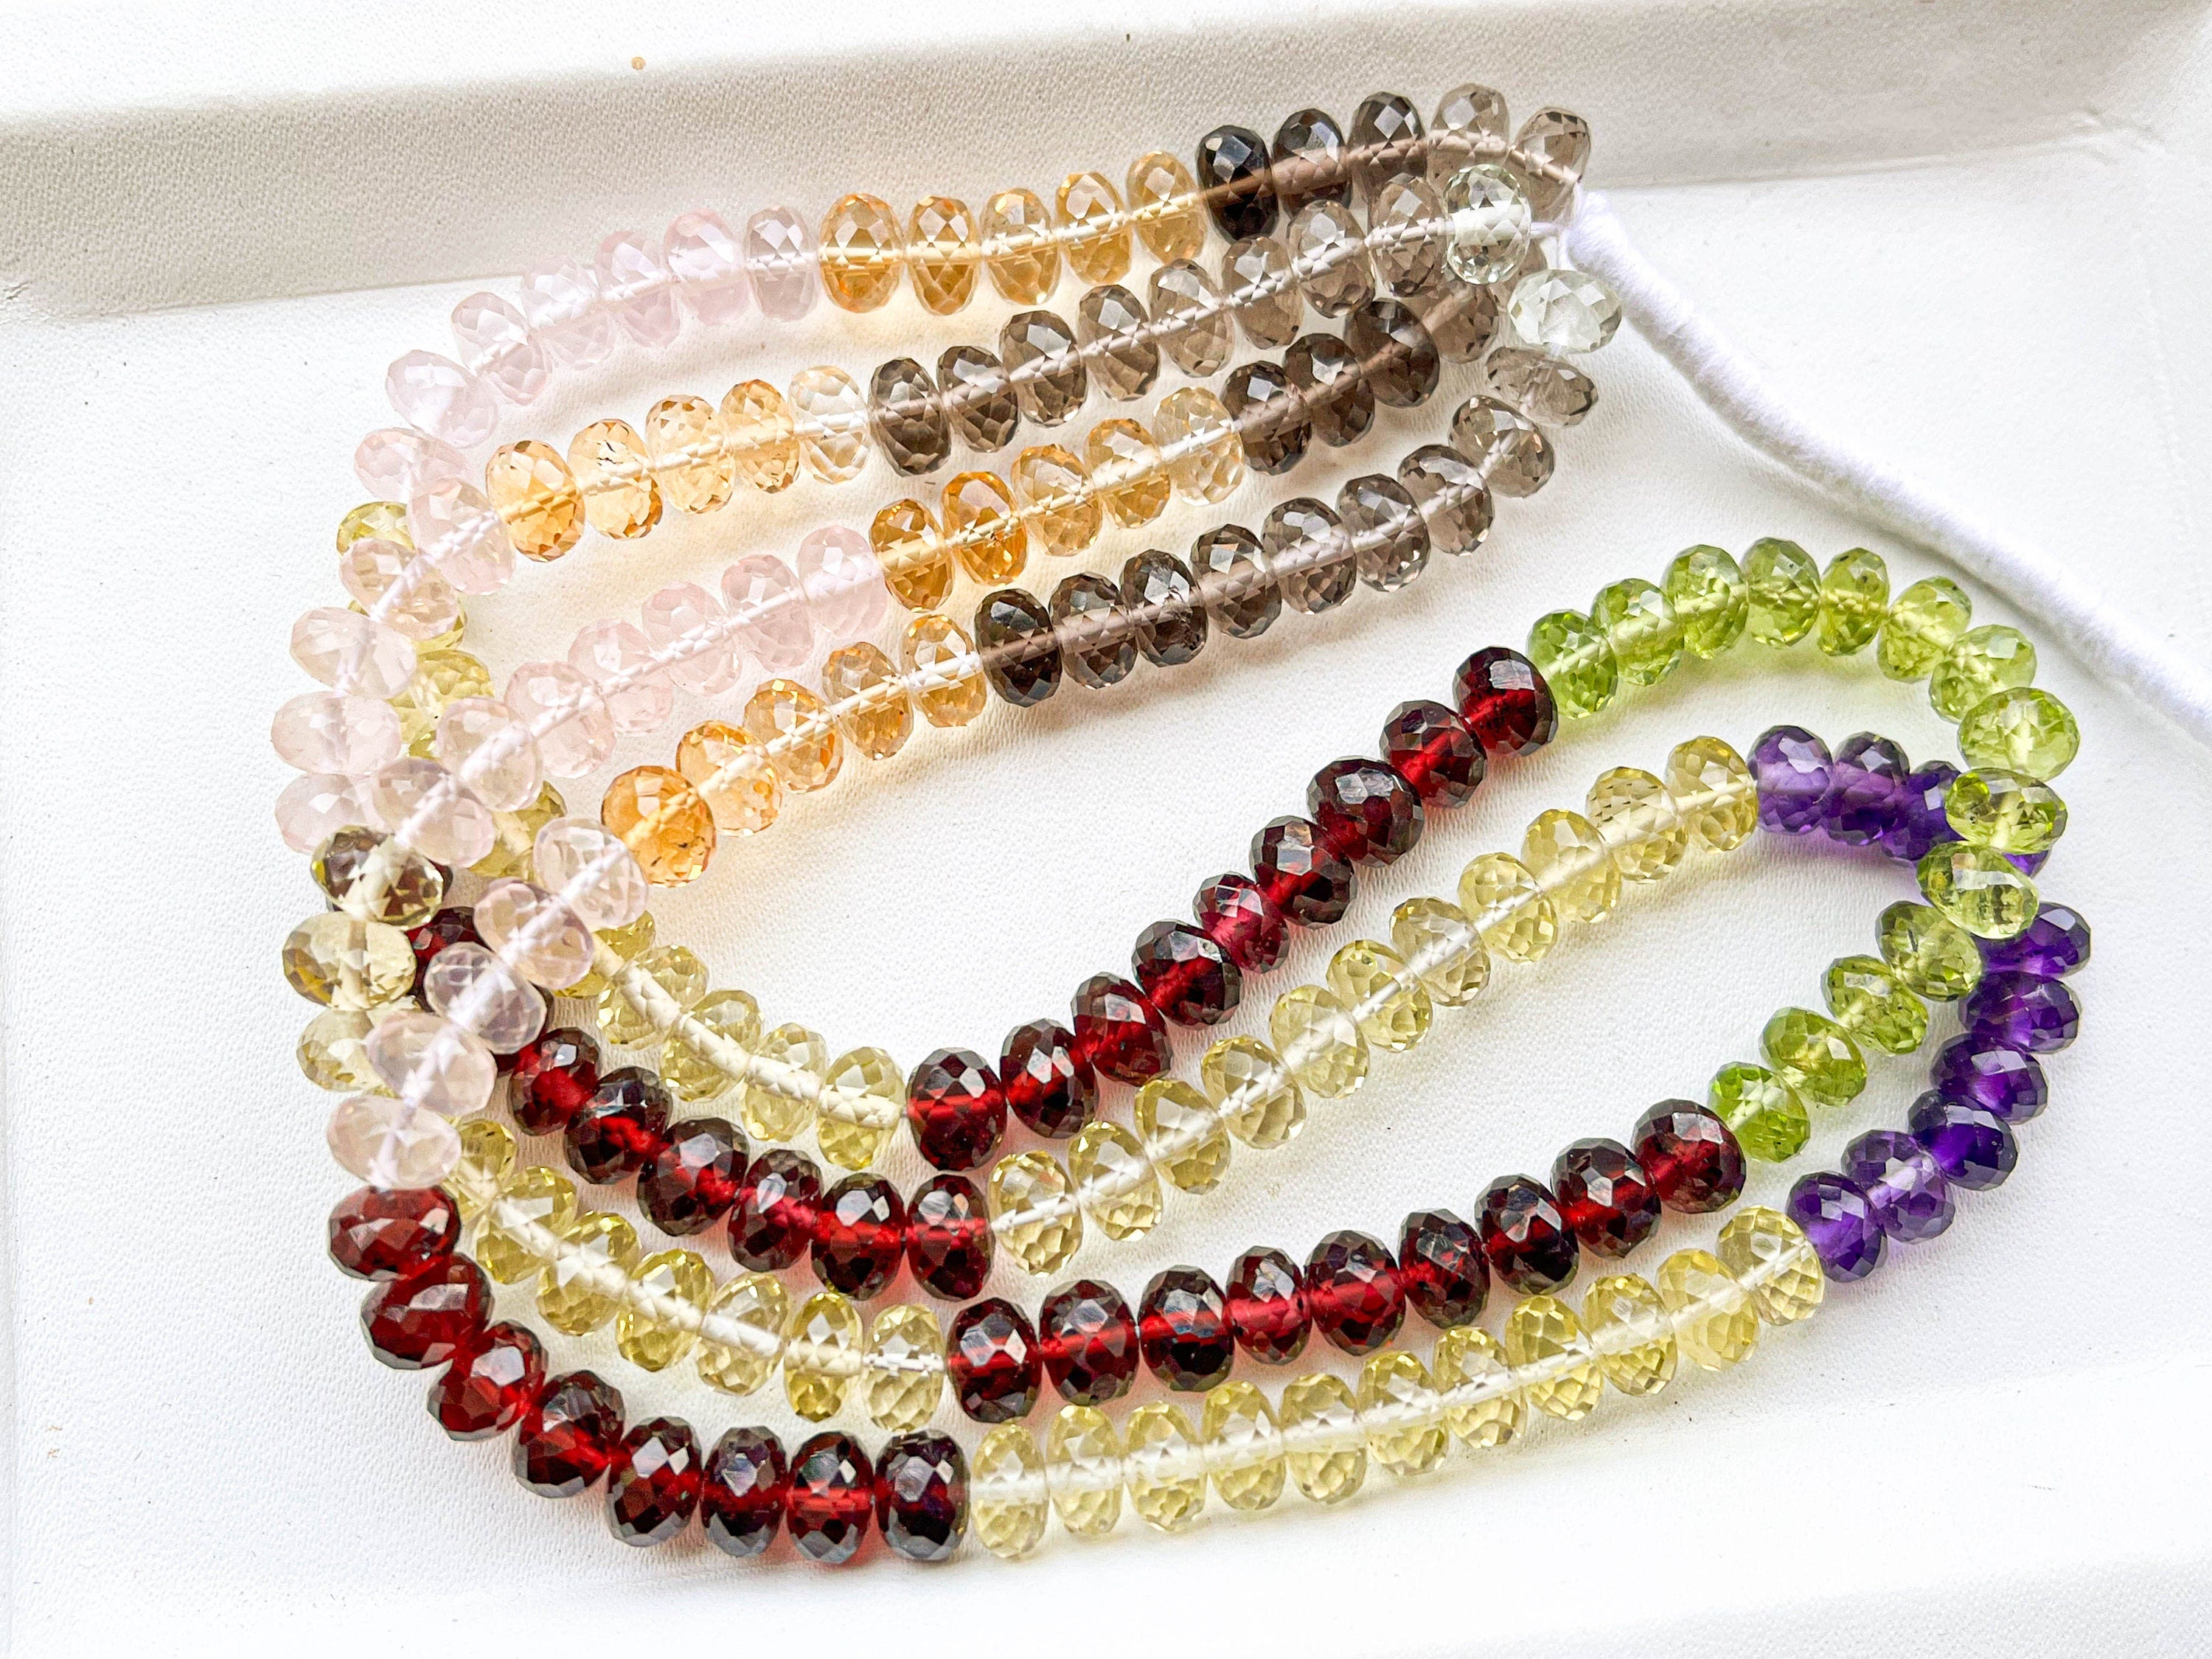 14" MULTIPLE GEMSTONE Beads Faceted Rondelle Shape, Natural Gemstone Beads, 7 mm, Faceted Gemstone Beads for jewelry making - Beadsforyourjewelry